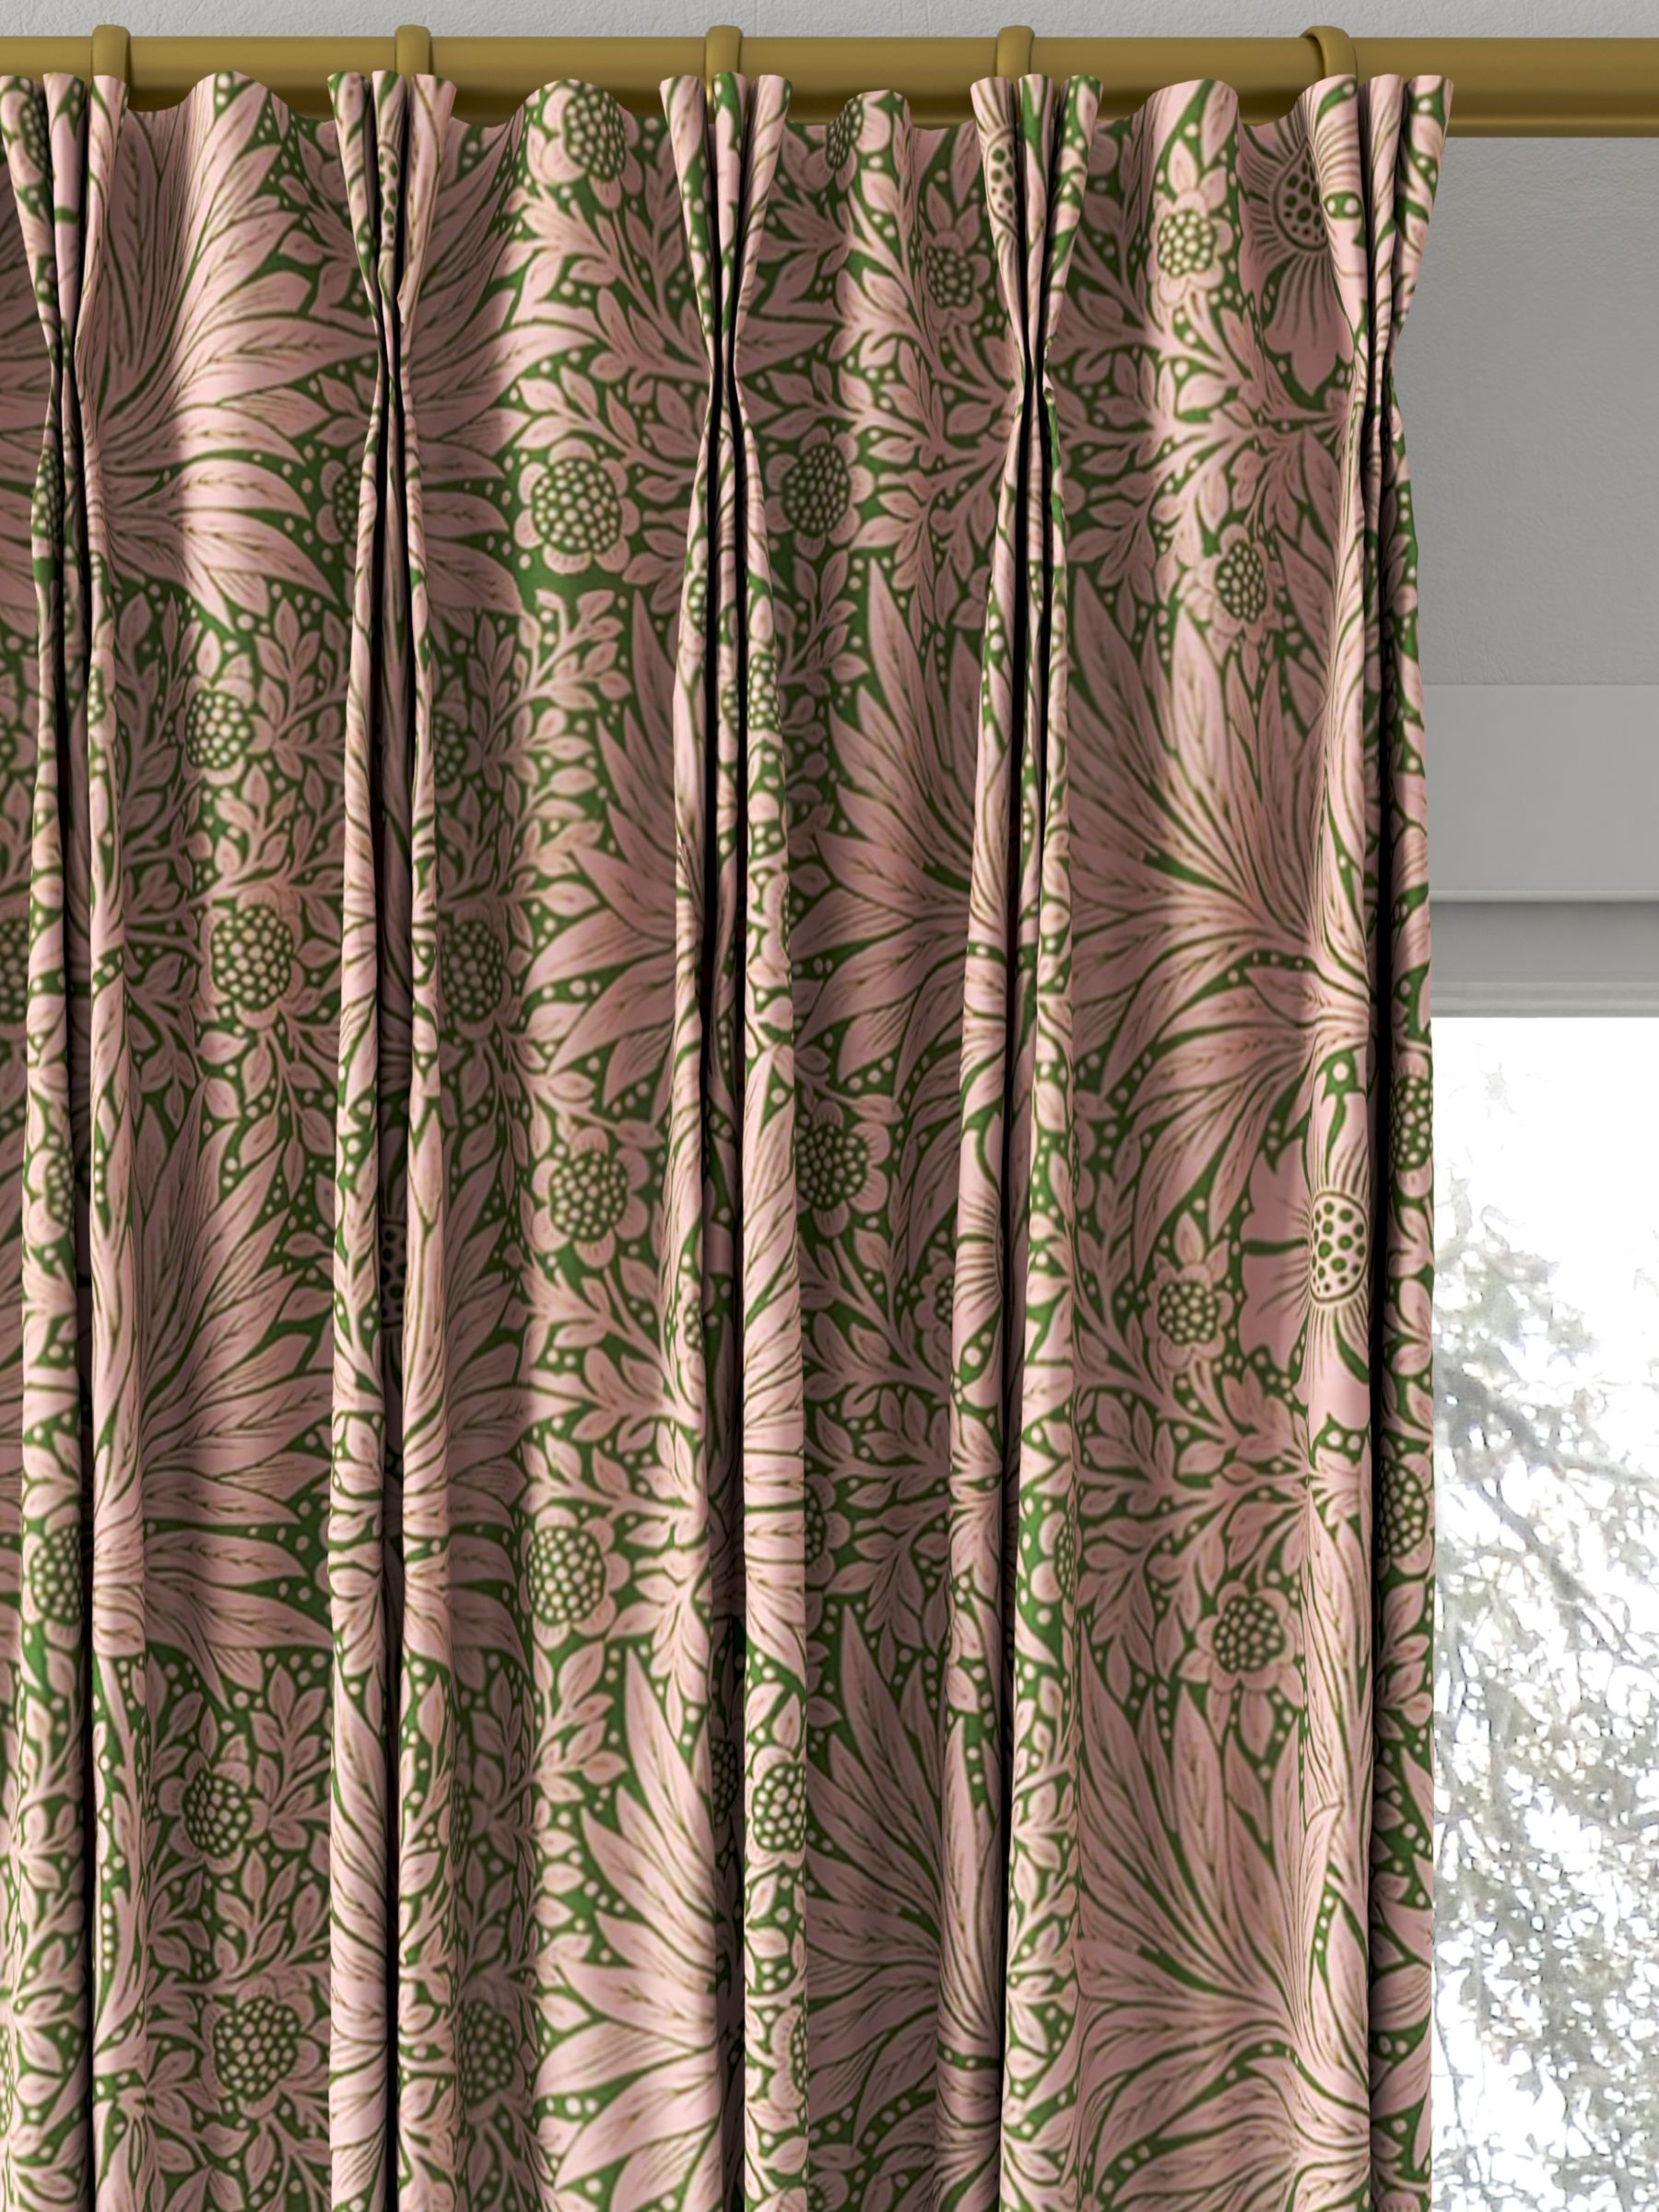 Morris & Co. Ben Pentreath Marigold Made to Measure Curtains, Olive/Pink